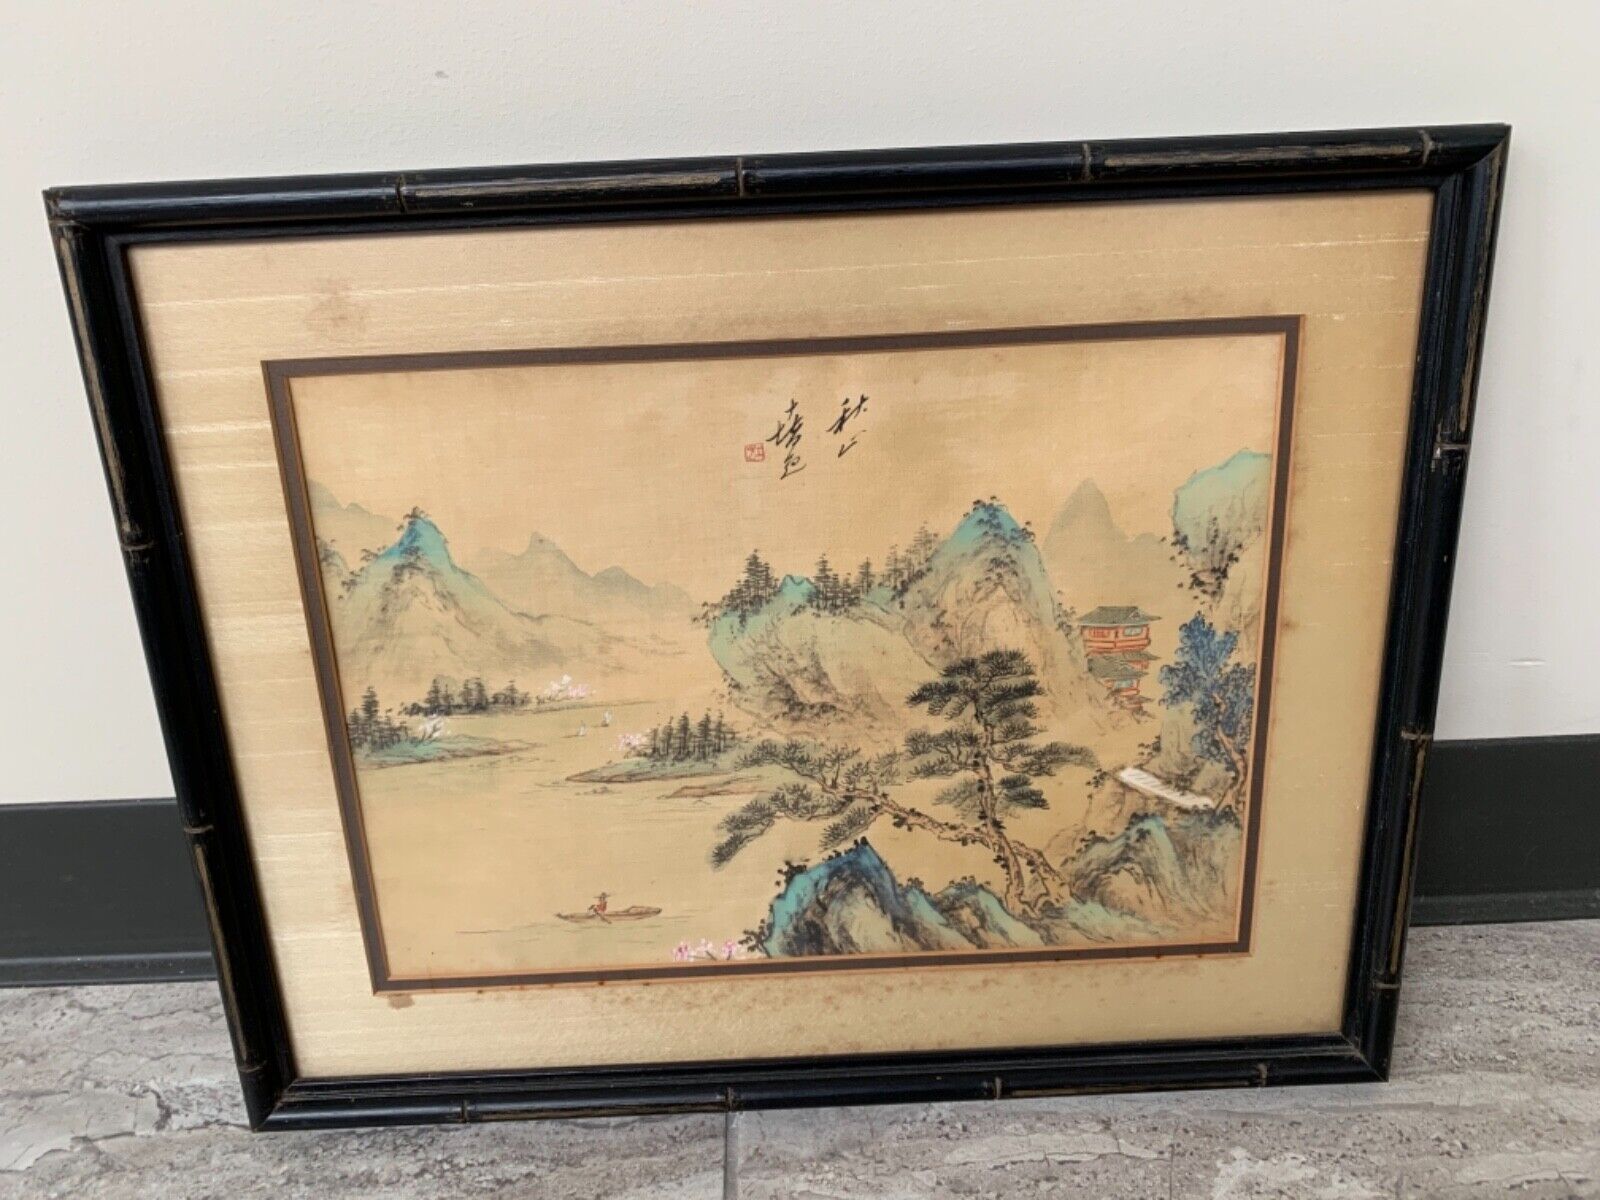 Vintage Chinese Asian Seascape Fisherman on Water Painting on Silk Framed